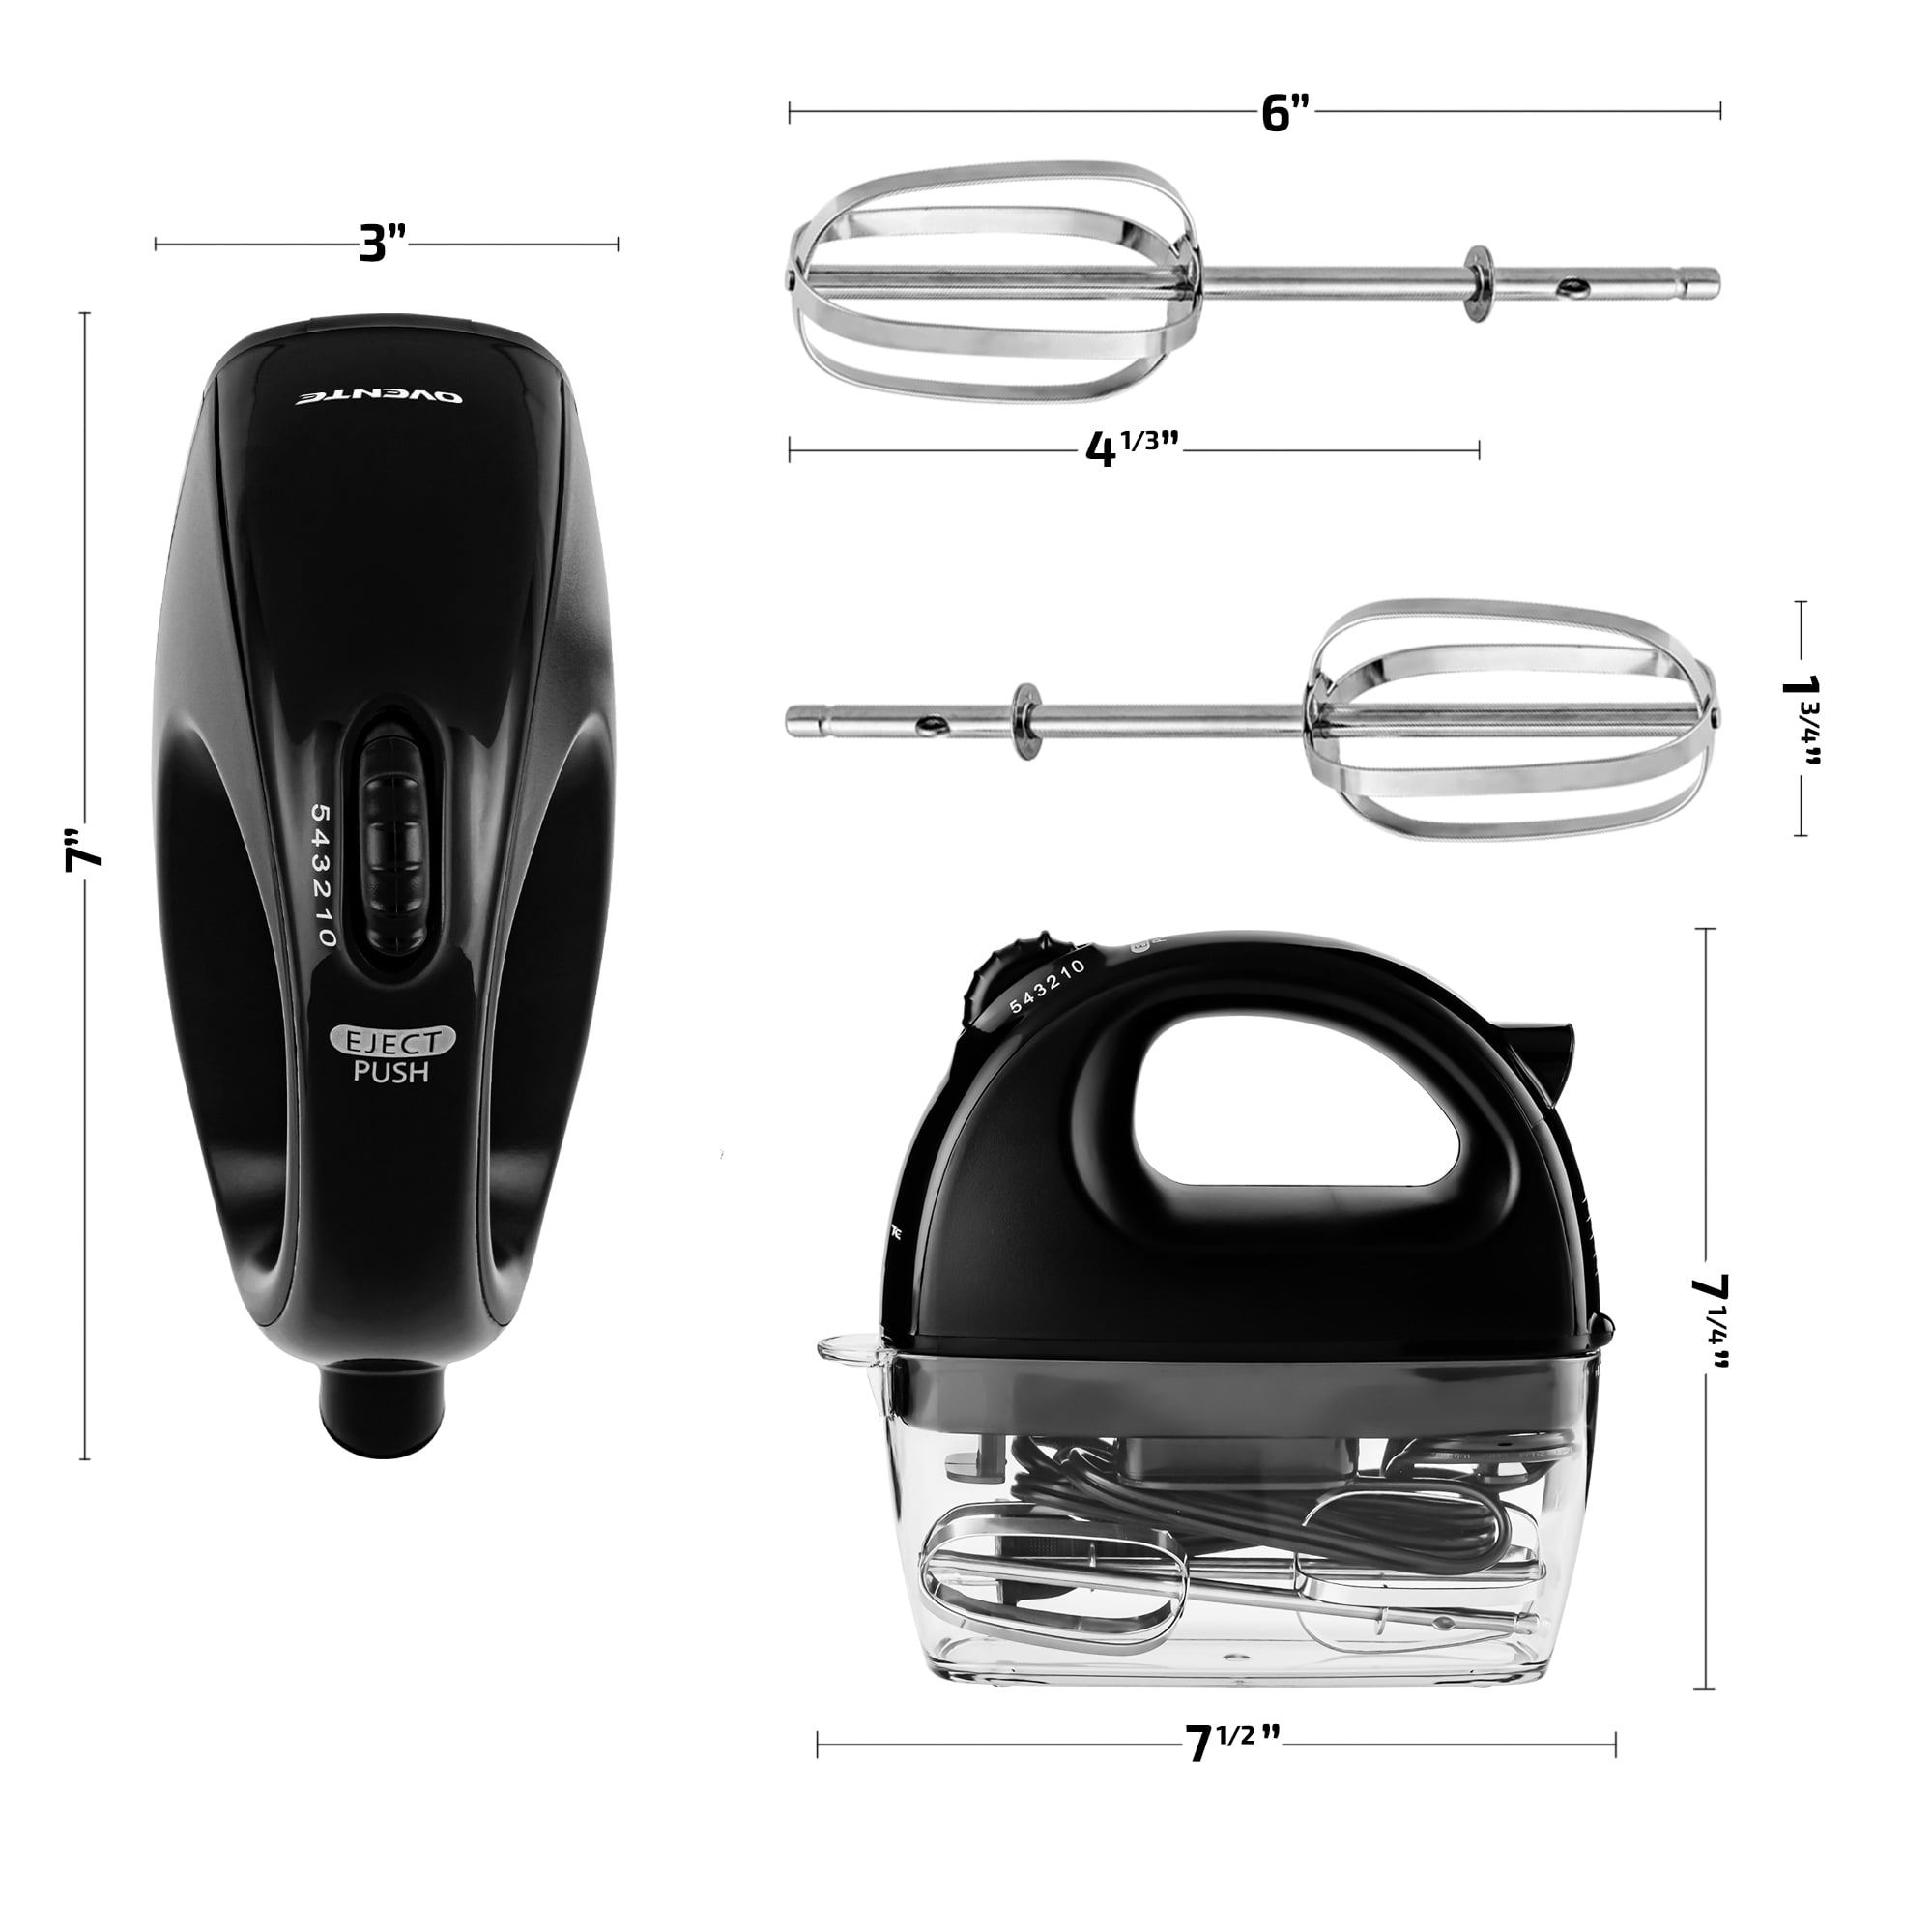 OVENTE 5-Speed Ultra Power Hand Mixer with Free Storage Case, Black HM151B  - The Home Depot